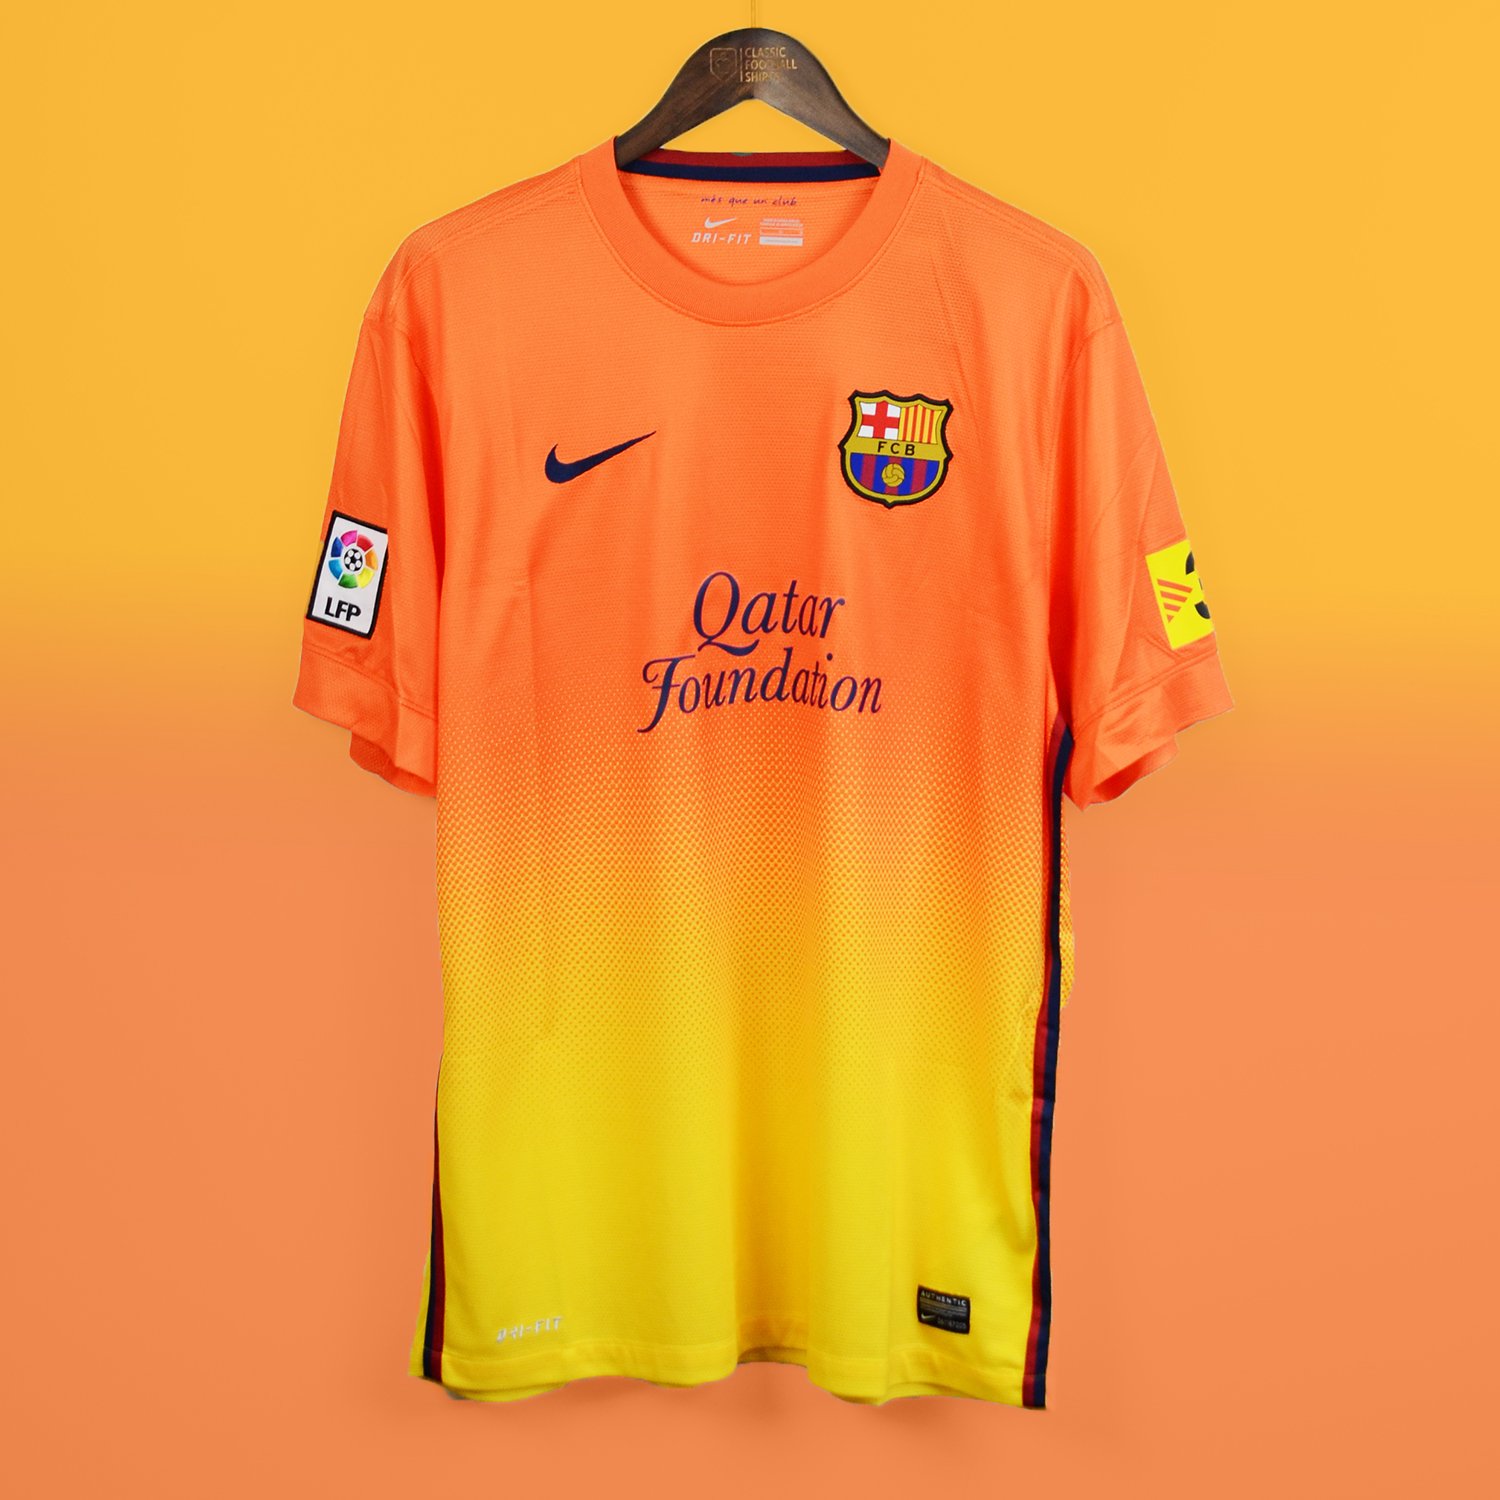 Voorkeur Gelach Kakadu Classic Football Shirts on Twitter: "Kit colours: Barcelona in Orange  2012-13: Barca picked up the La Liga title in emphatic style in this two  tone orange and yellow shirt picking up 100